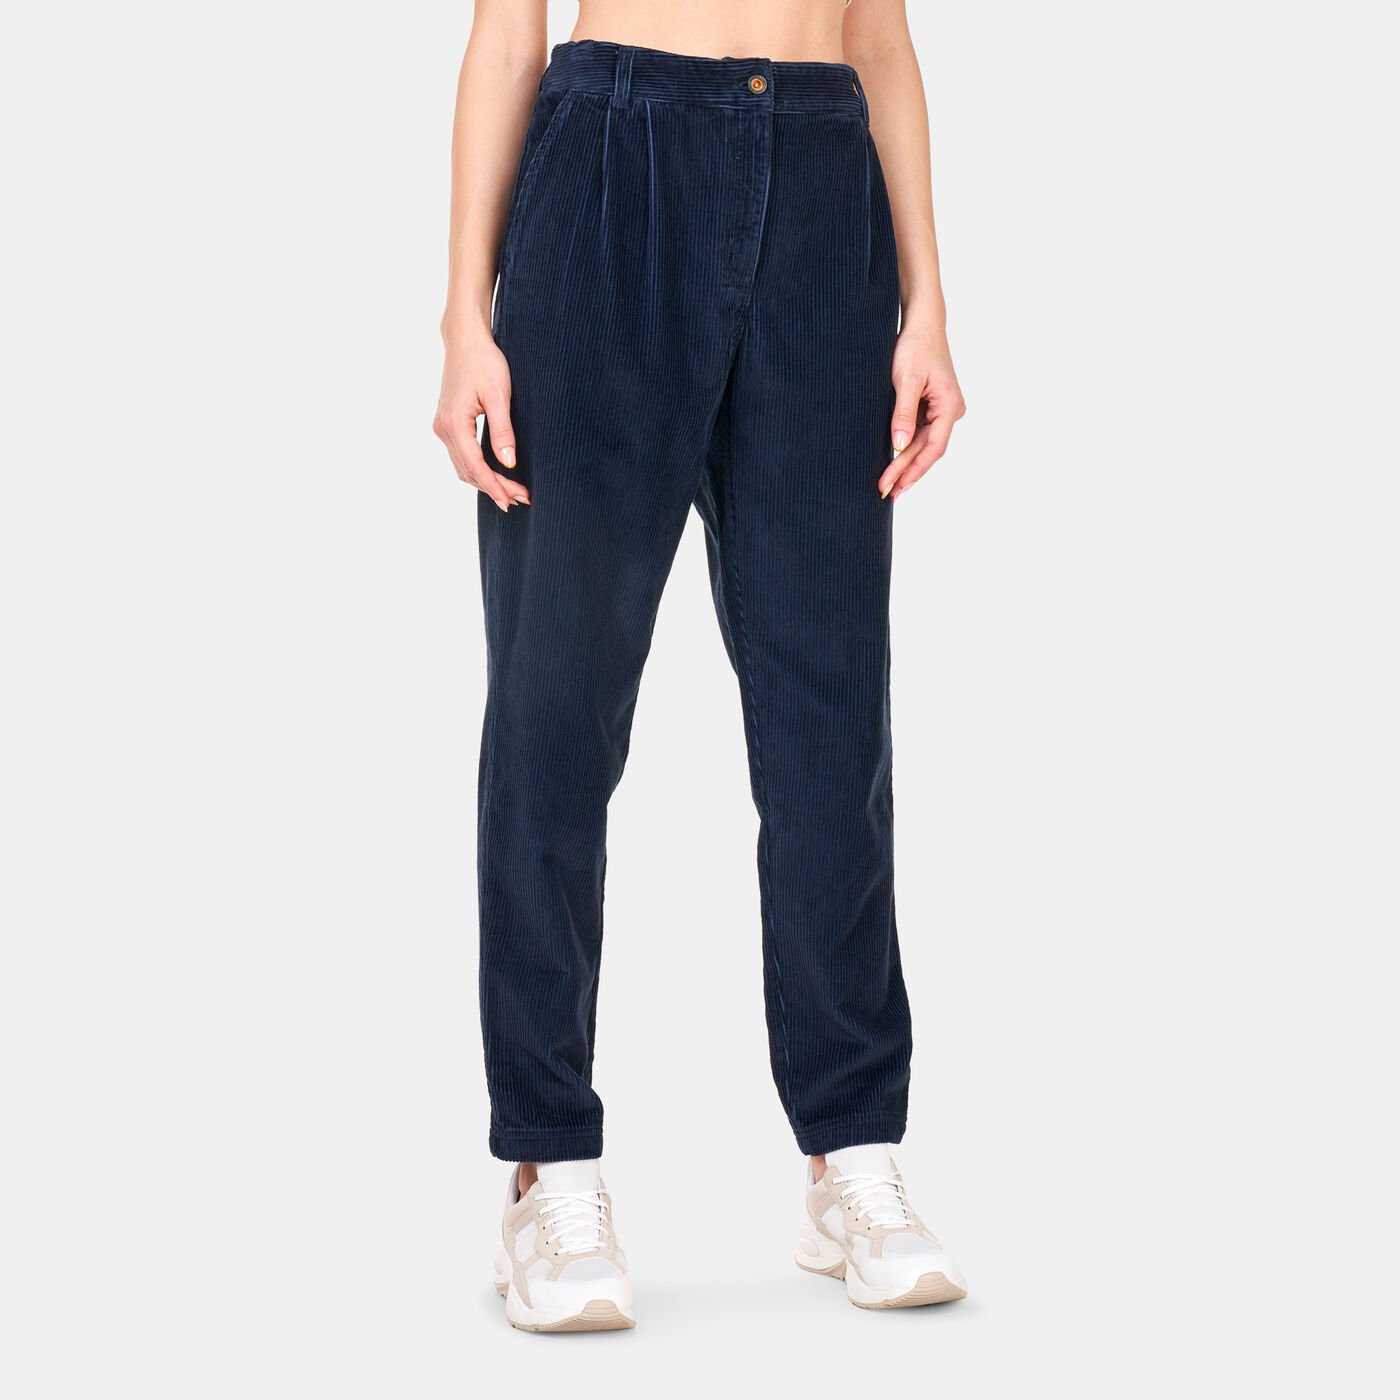 Women's Corduroy Relaxed Fit Pants